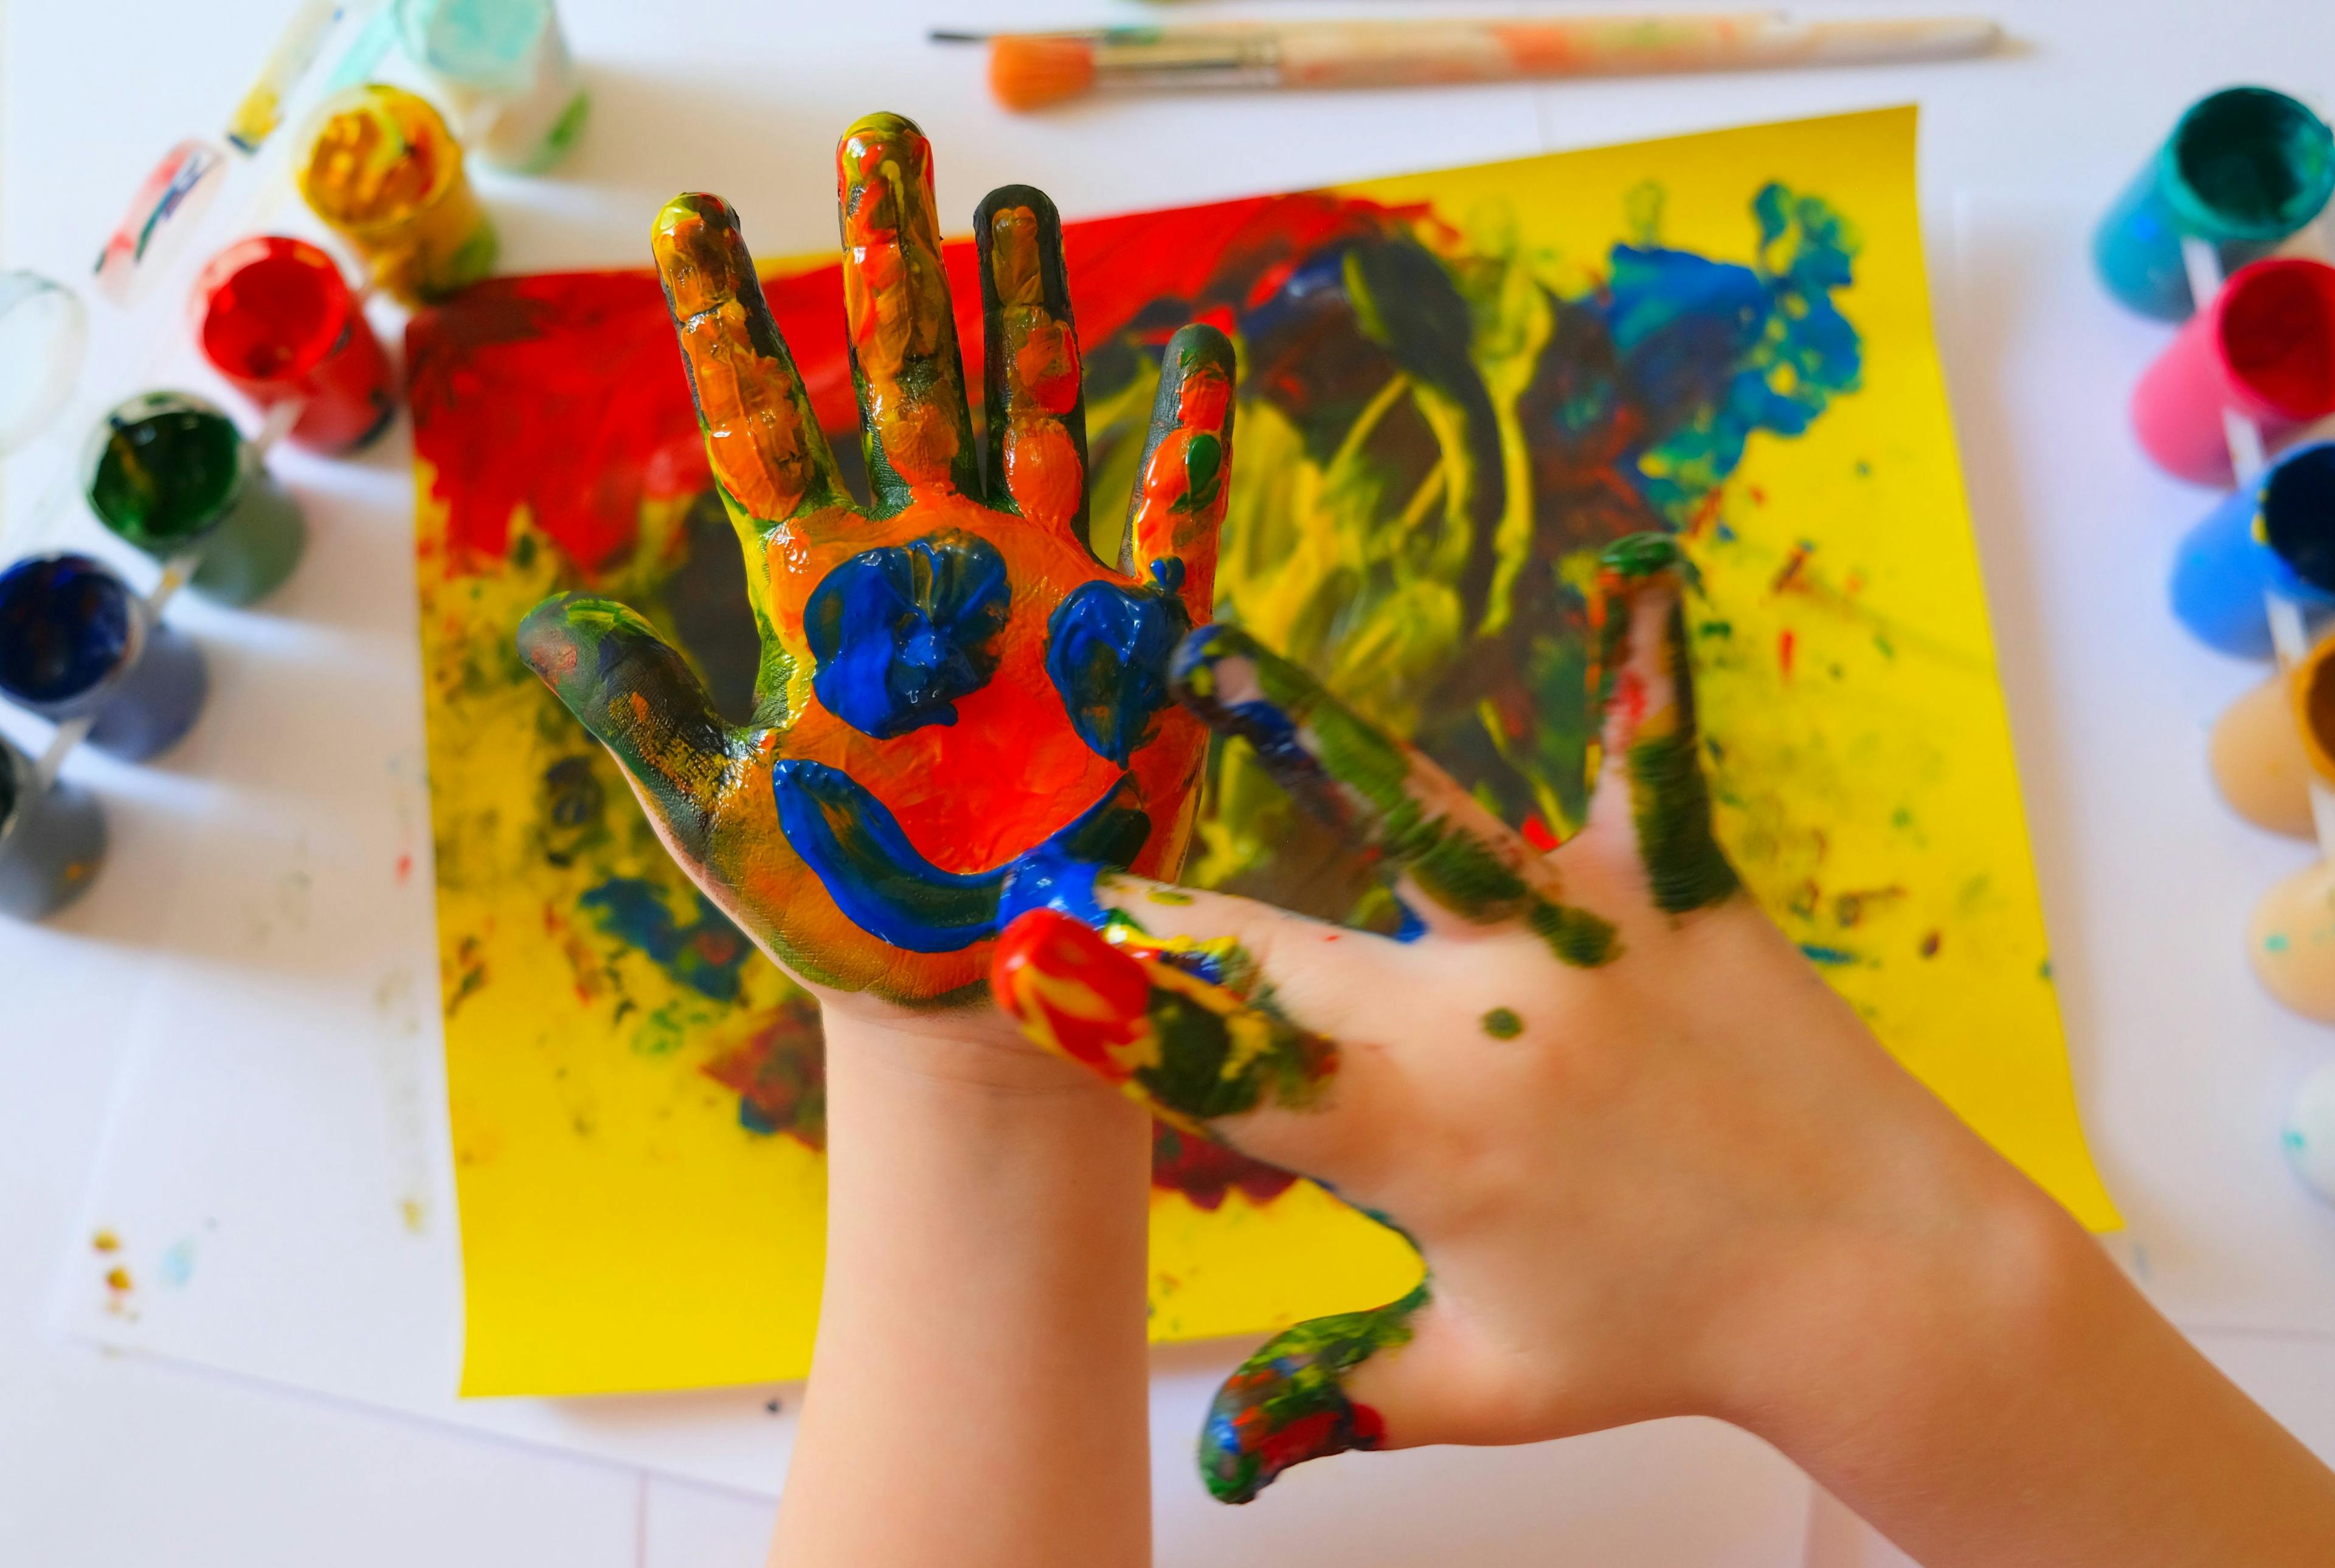 Art therapy for children with cancer: Child painting by finger hand. Ideas for drawing with finger paints. Children development . The concept of a happy childhood and children's day. | Image credit: ElenaEmiliya - stock.adobe.com